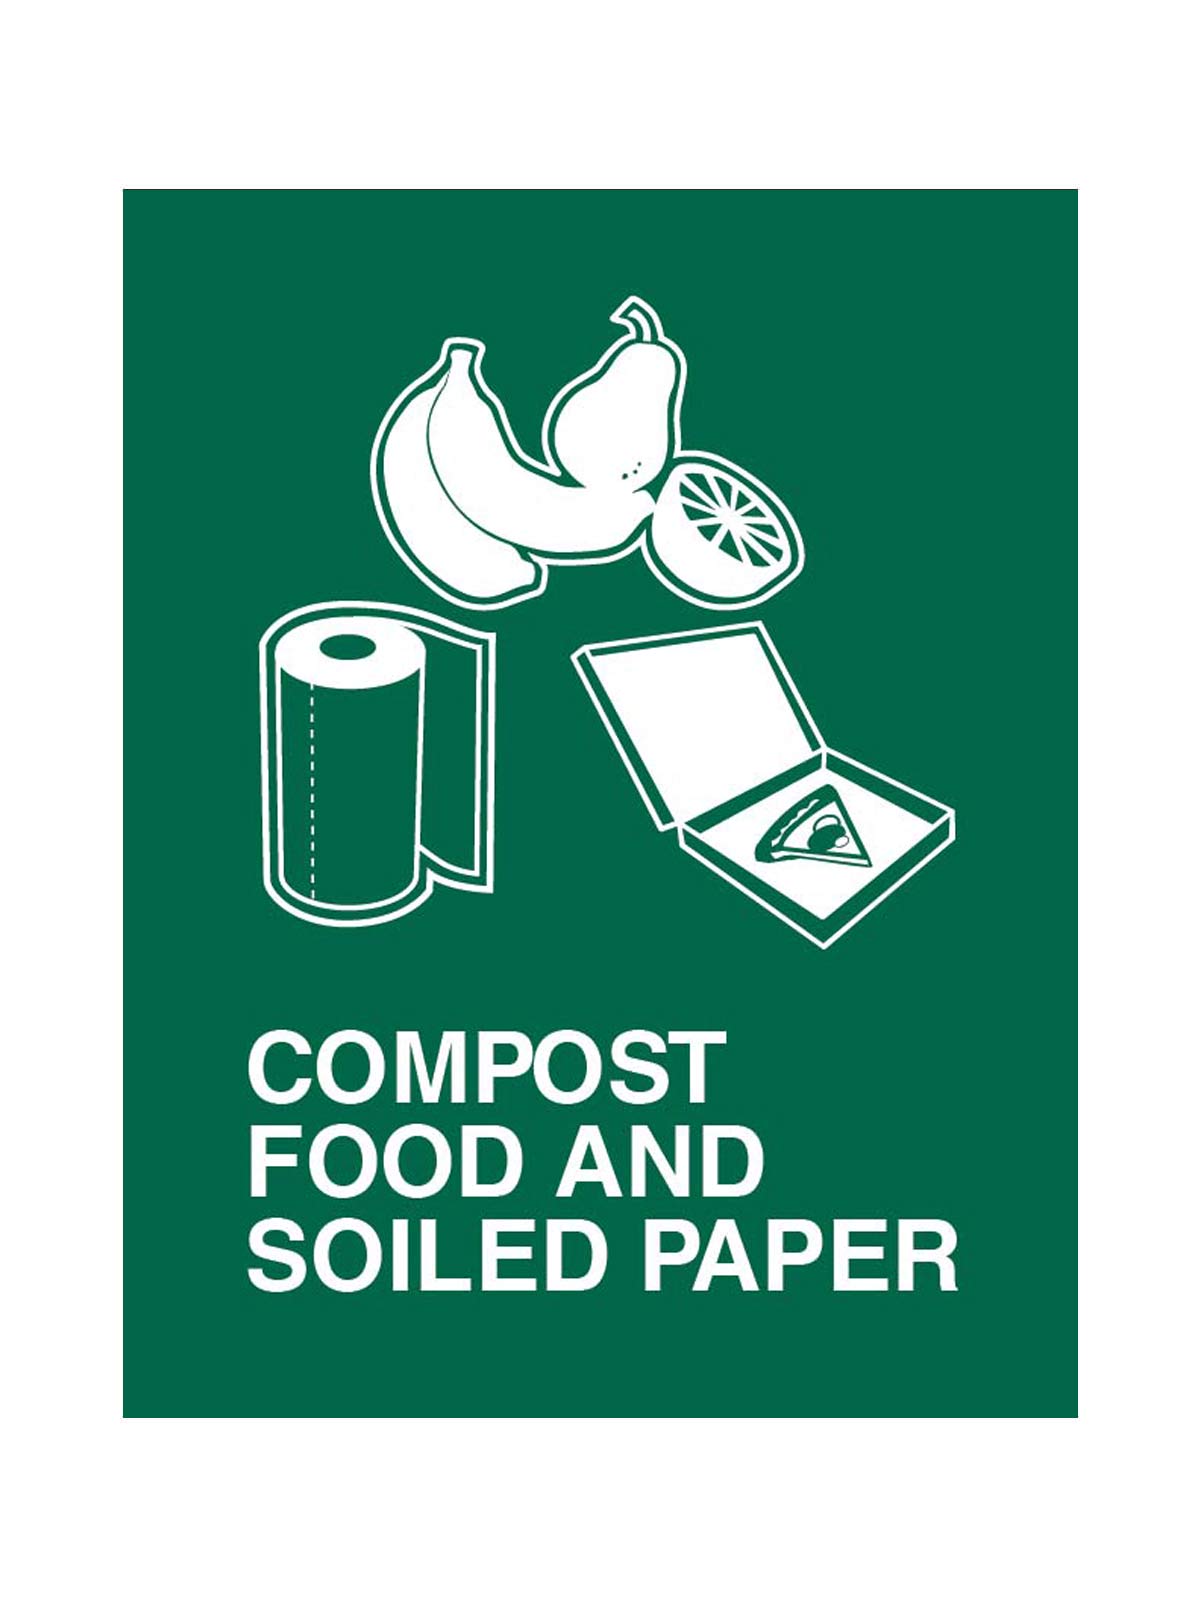 Illustration of fruits, towel roll, and pizza box on green background.